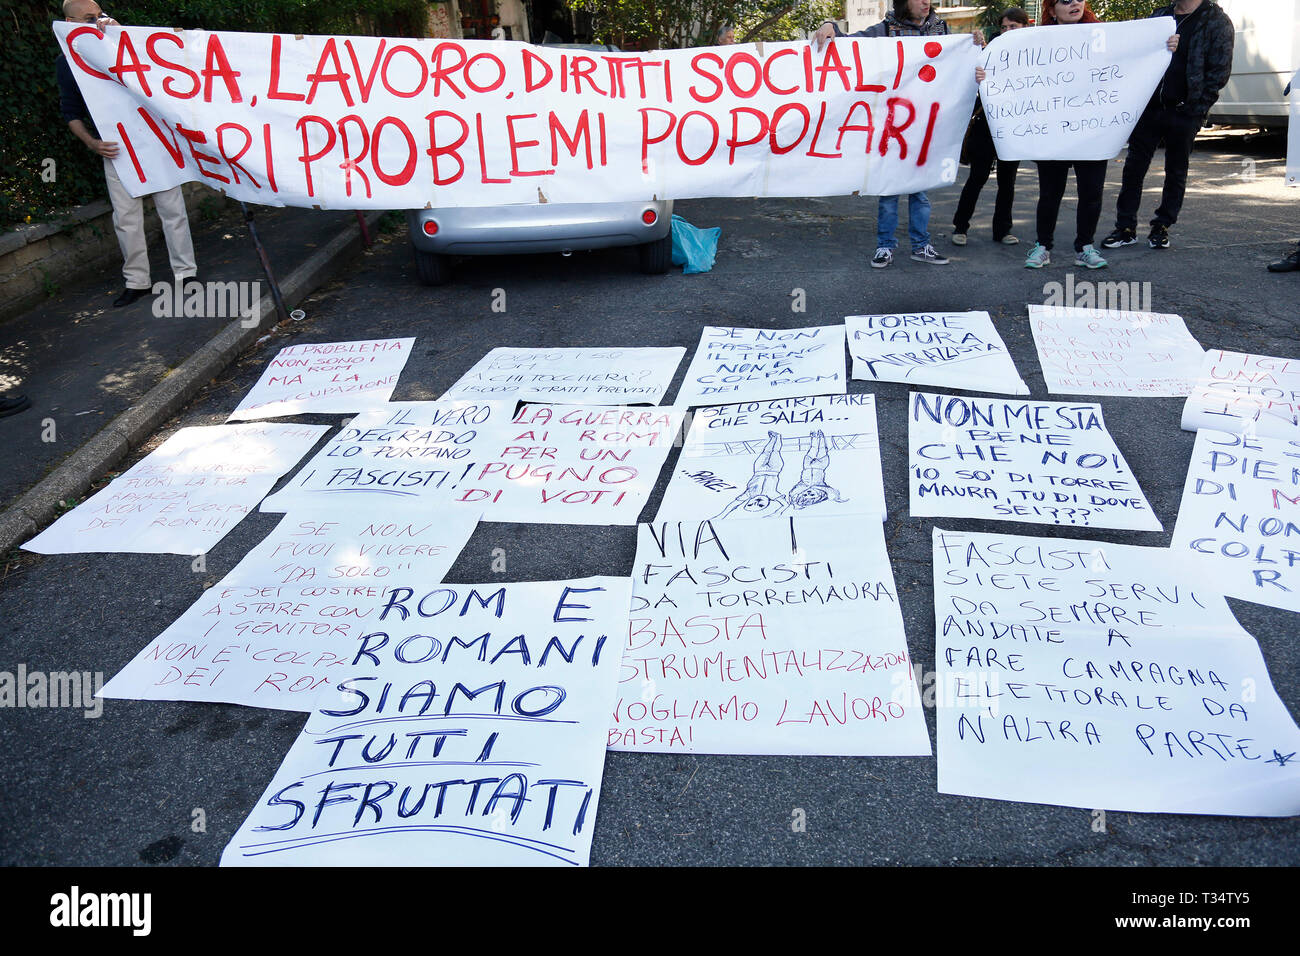 Rome, Italy. 06th Apr, 2019. Banner: House, work and social rights, the real problems Rome April 6th 2019. Counterdemonstration of activists from the anti-fascist movements in the Torre Maura district of Rome, two days after Rome residents and neo-fascists burned bins and shouted racist slogans at Roma families being temporarily hosted in their neighbourhood.  photo di Samantha Zucchi/Insidefoto Credit: insidefoto srl/Alamy Live News Stock Photo